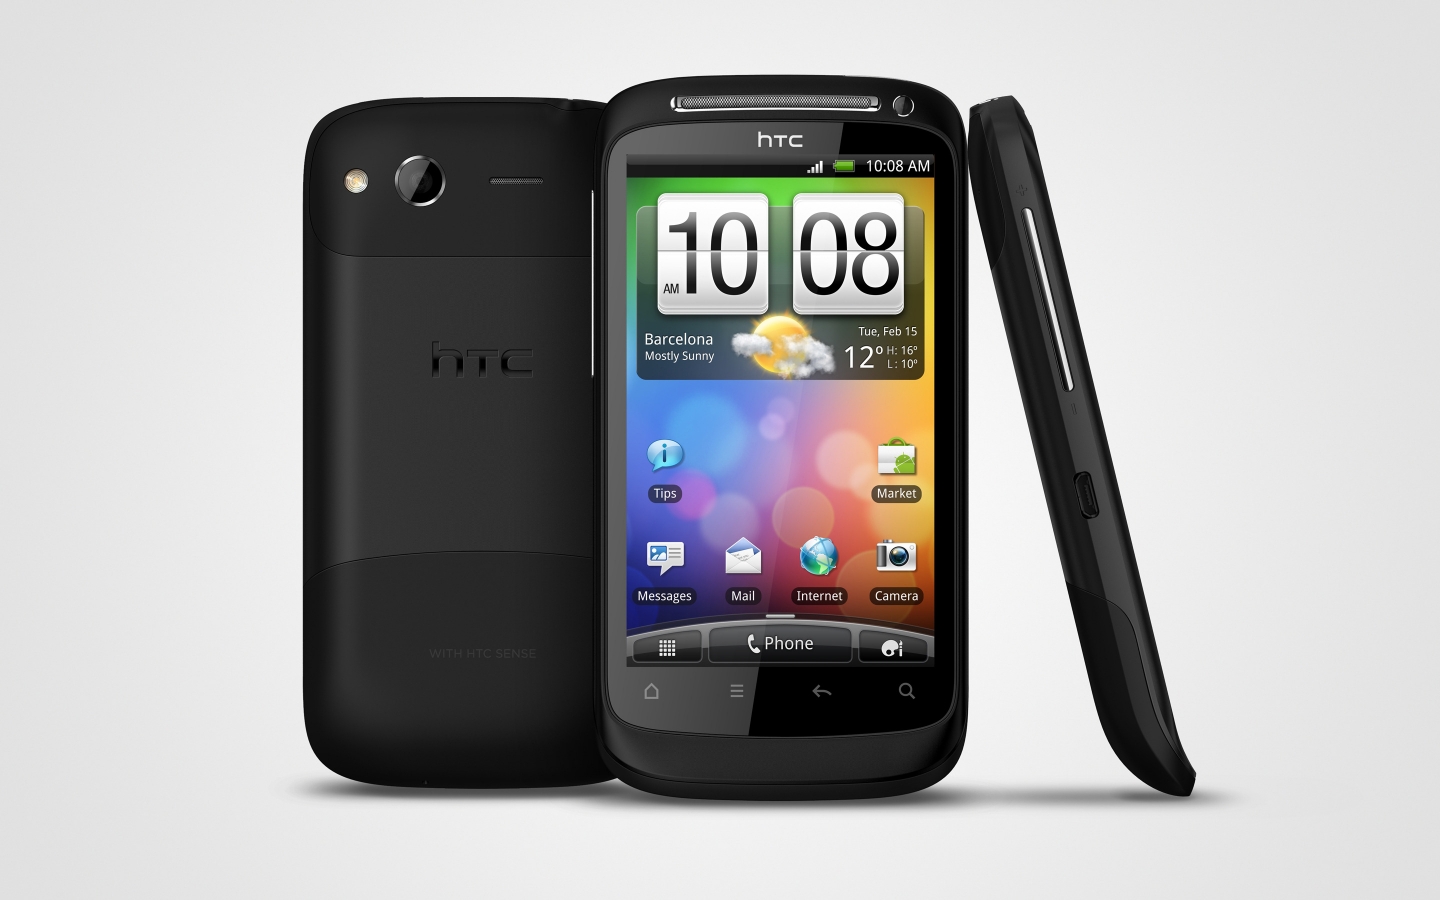 HTC Desire S for 1440 x 900 widescreen resolution